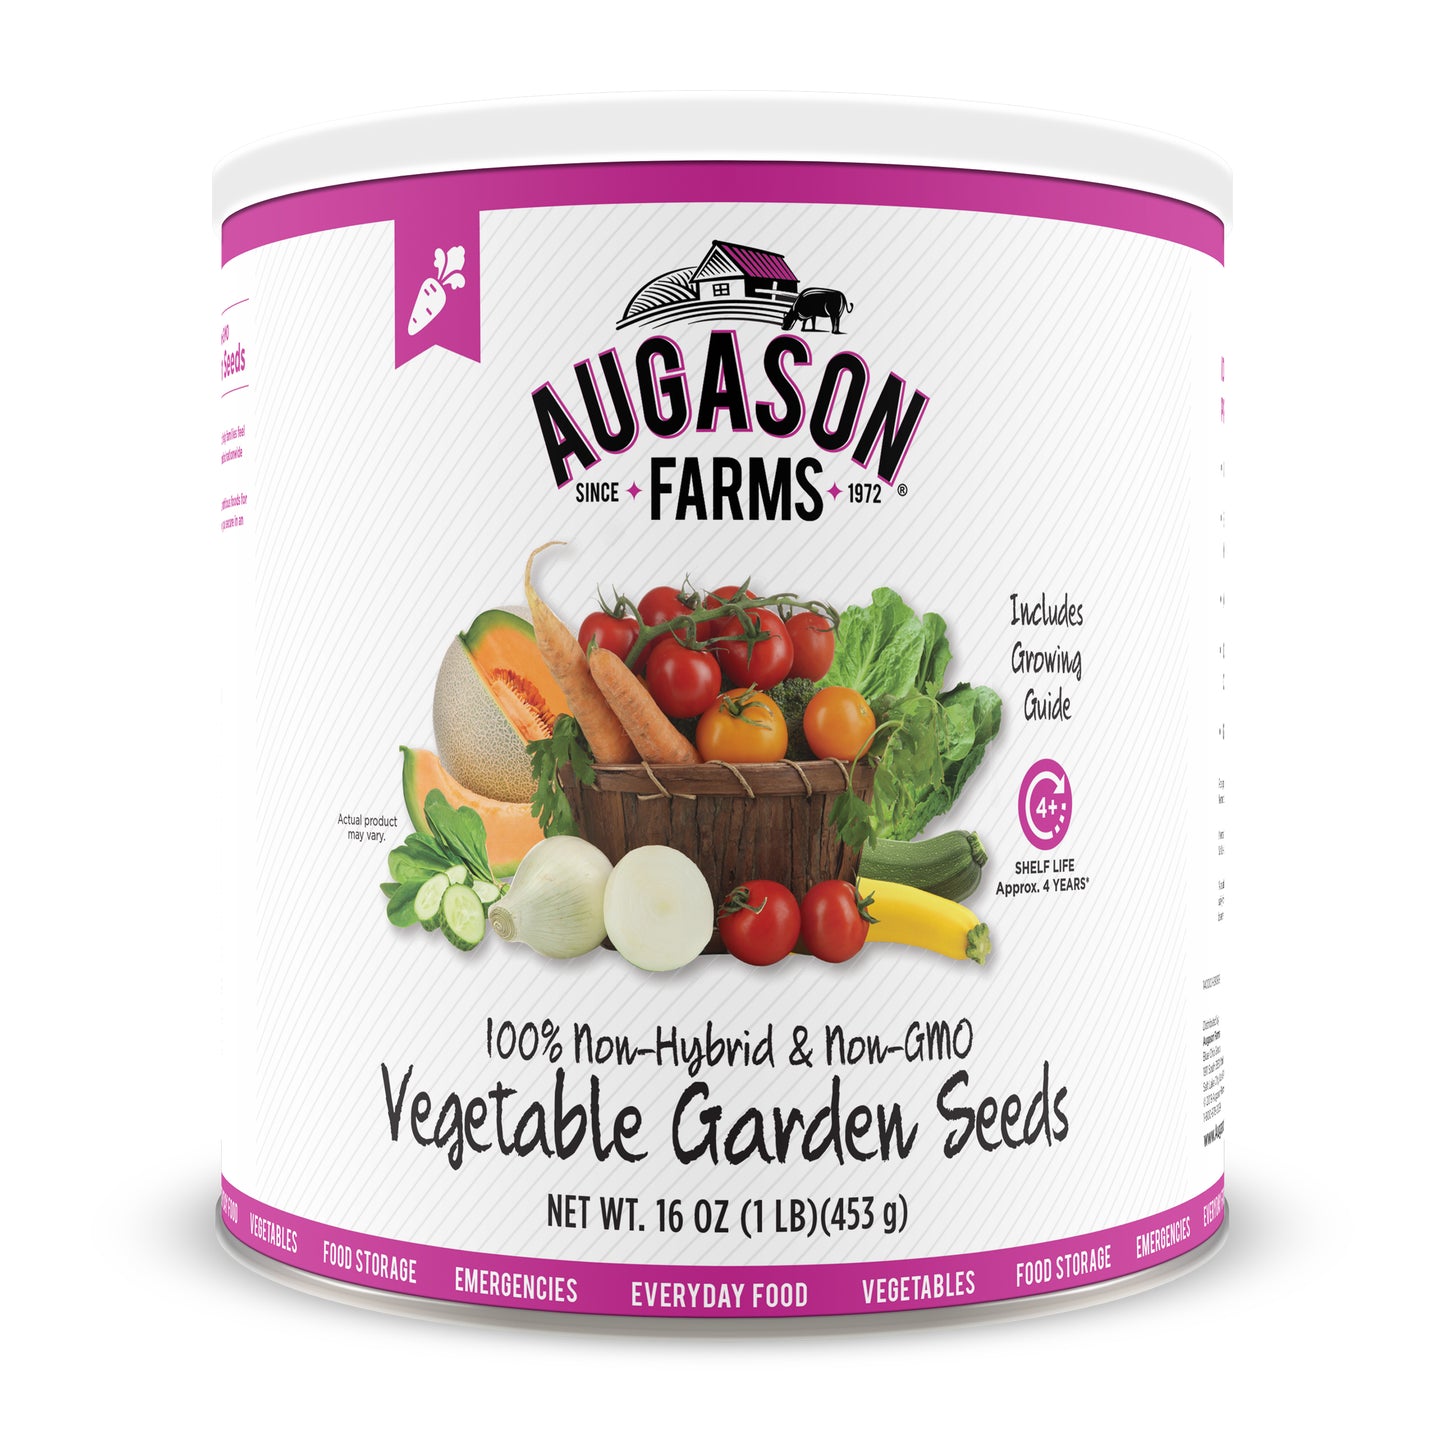 Exclusive By Safecastle- Augason Farms 1 Year 1 Person Kit